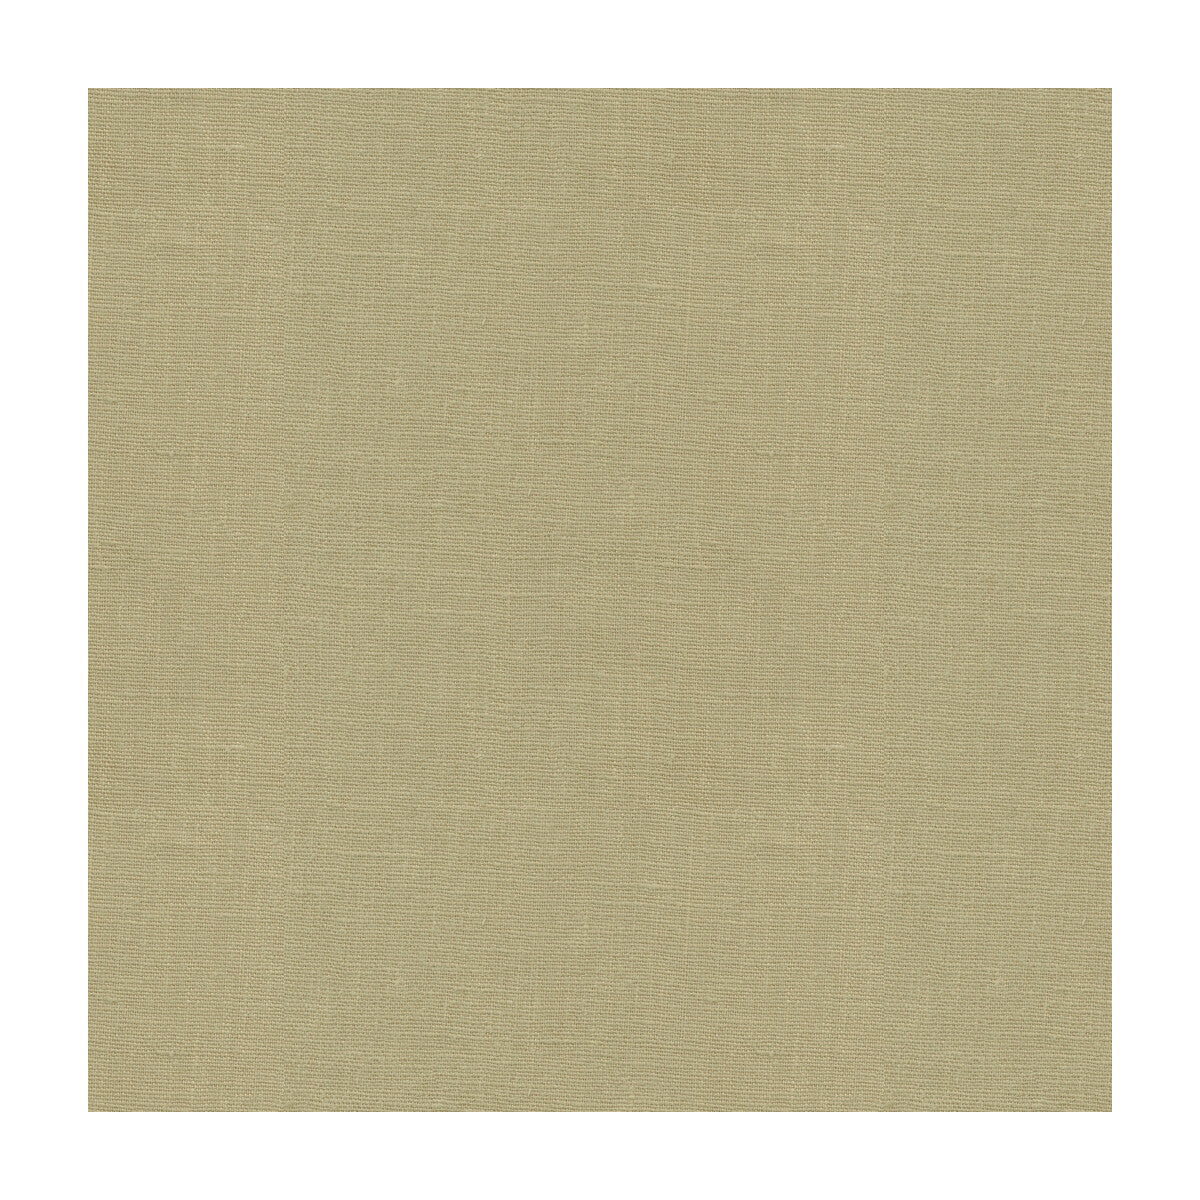 Dublin fabric in linen color - pattern 32344.1621.0 - by Kravet Basics in the Perfect Plains collection